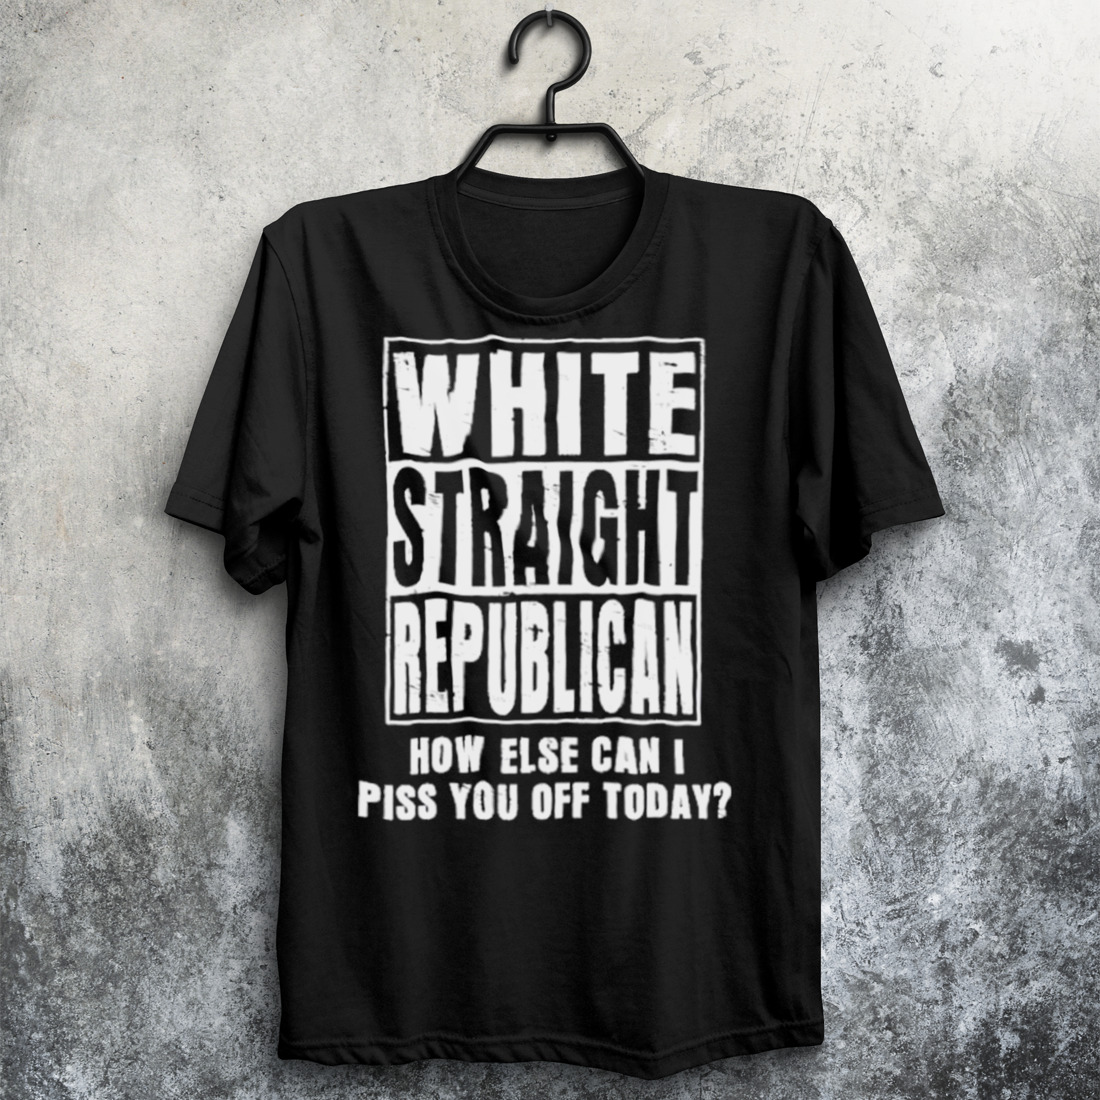 White Straight Republican How Else Can I Pis You Of Today shirt